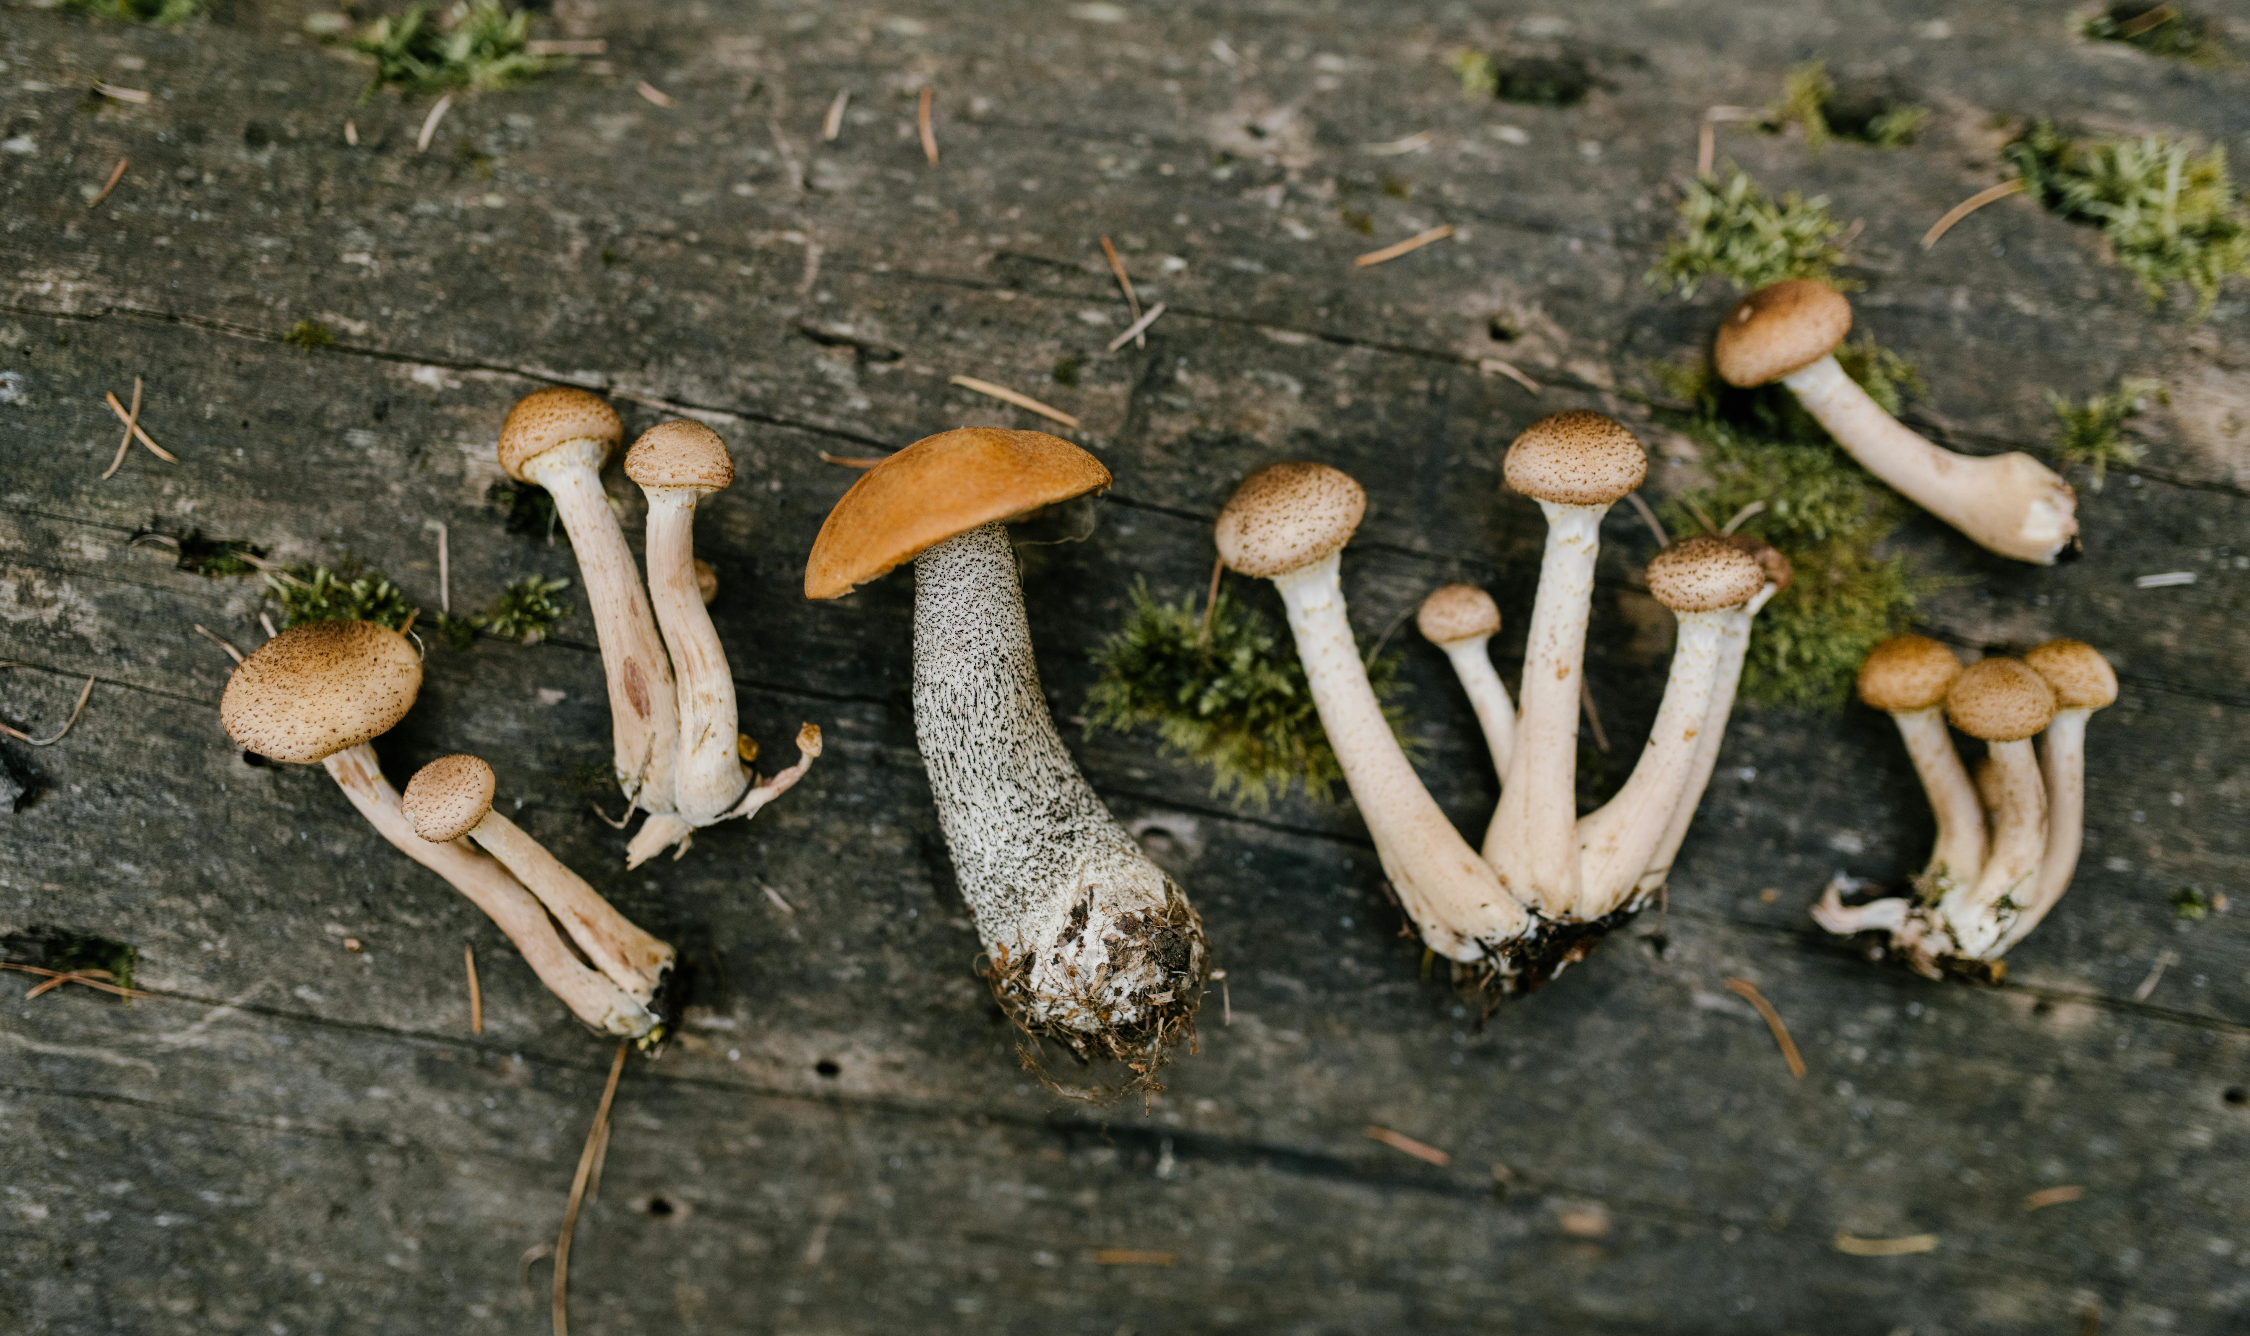 Are Mushrooms a Source of Protein? Here are 5 Unexpected Health Advantages of Medicinal Mushrooms